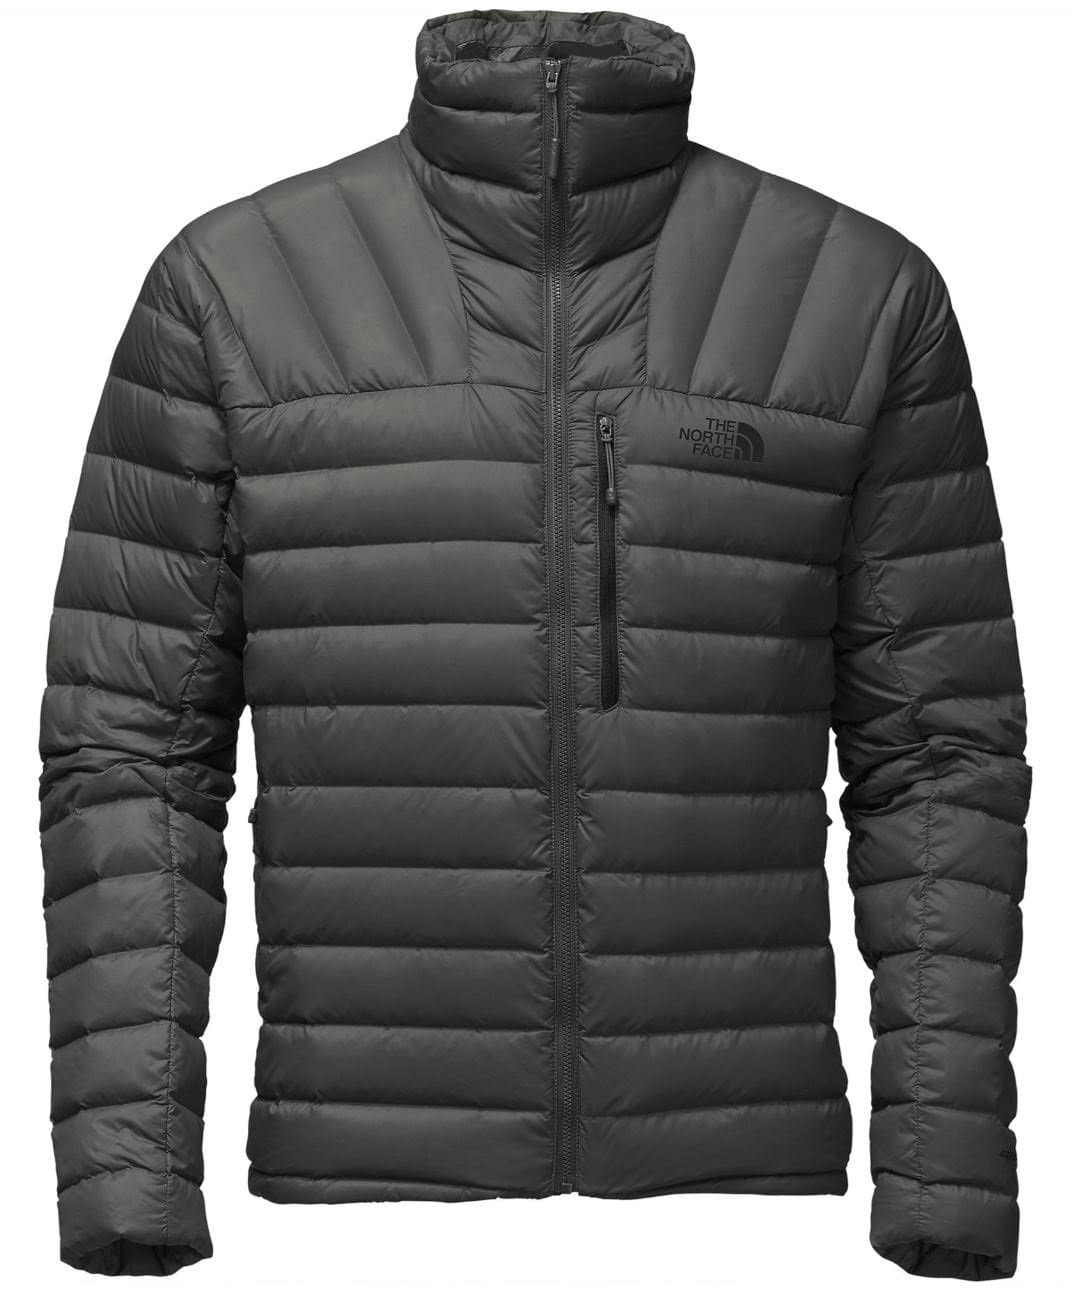 The North Face Men’s Morph Jacket